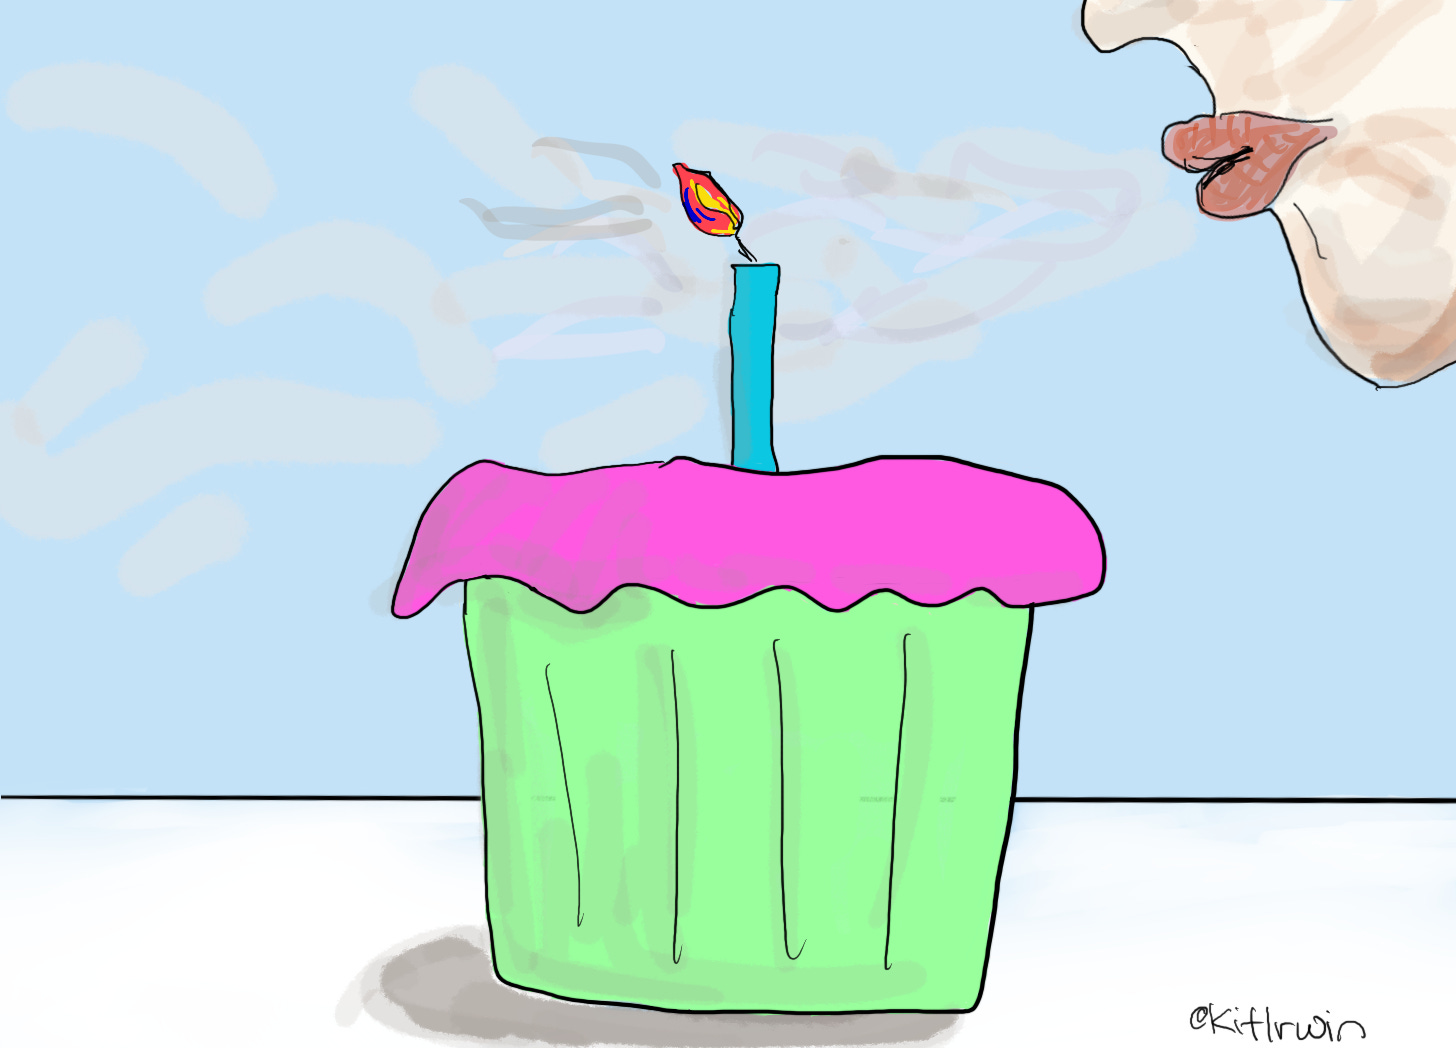 Lips blowing at a candle perched on top of a cupcake. The flame is leaning away from the lips.